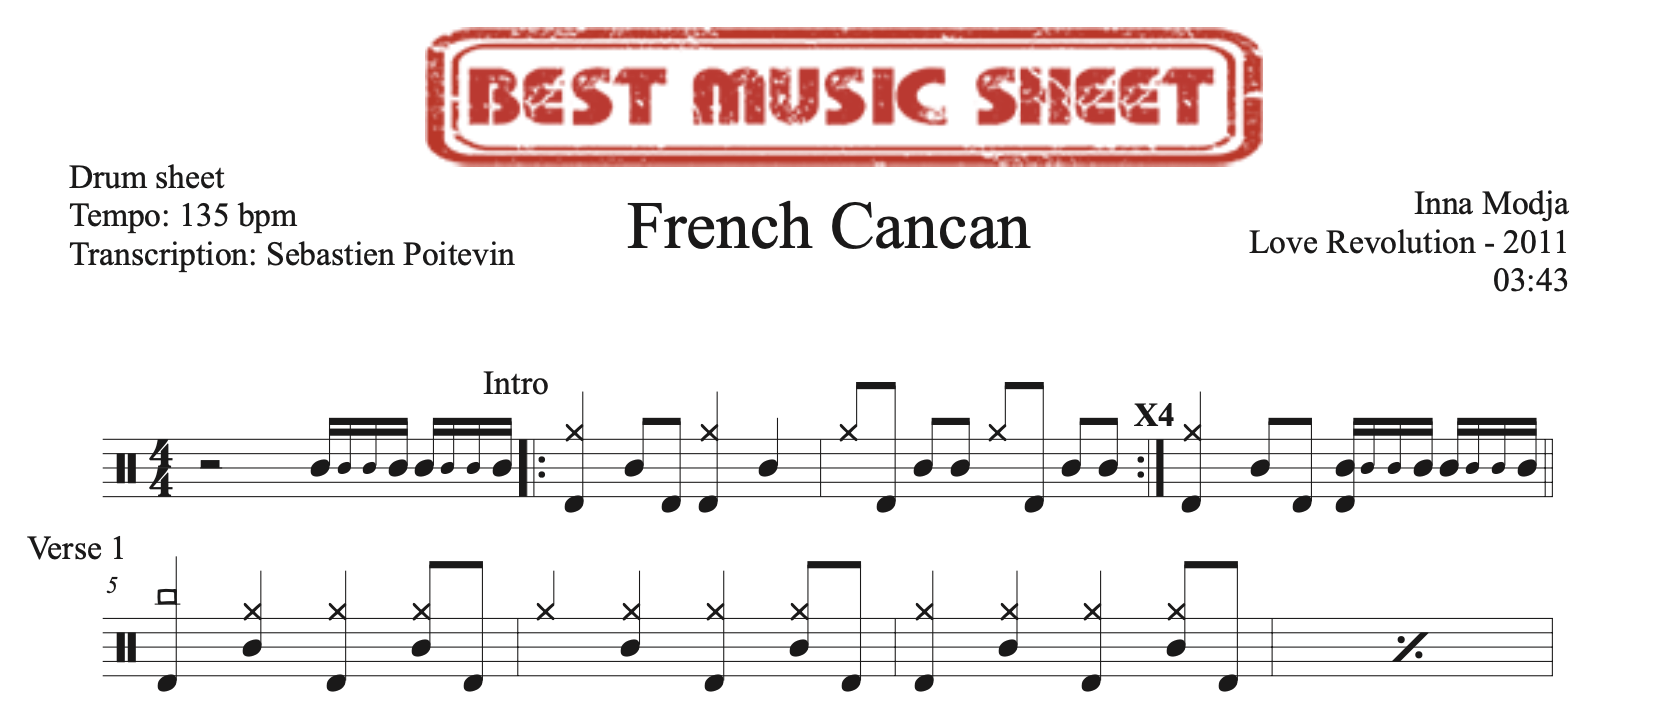 Sample drum sheet of French Cancan by Inna Modja